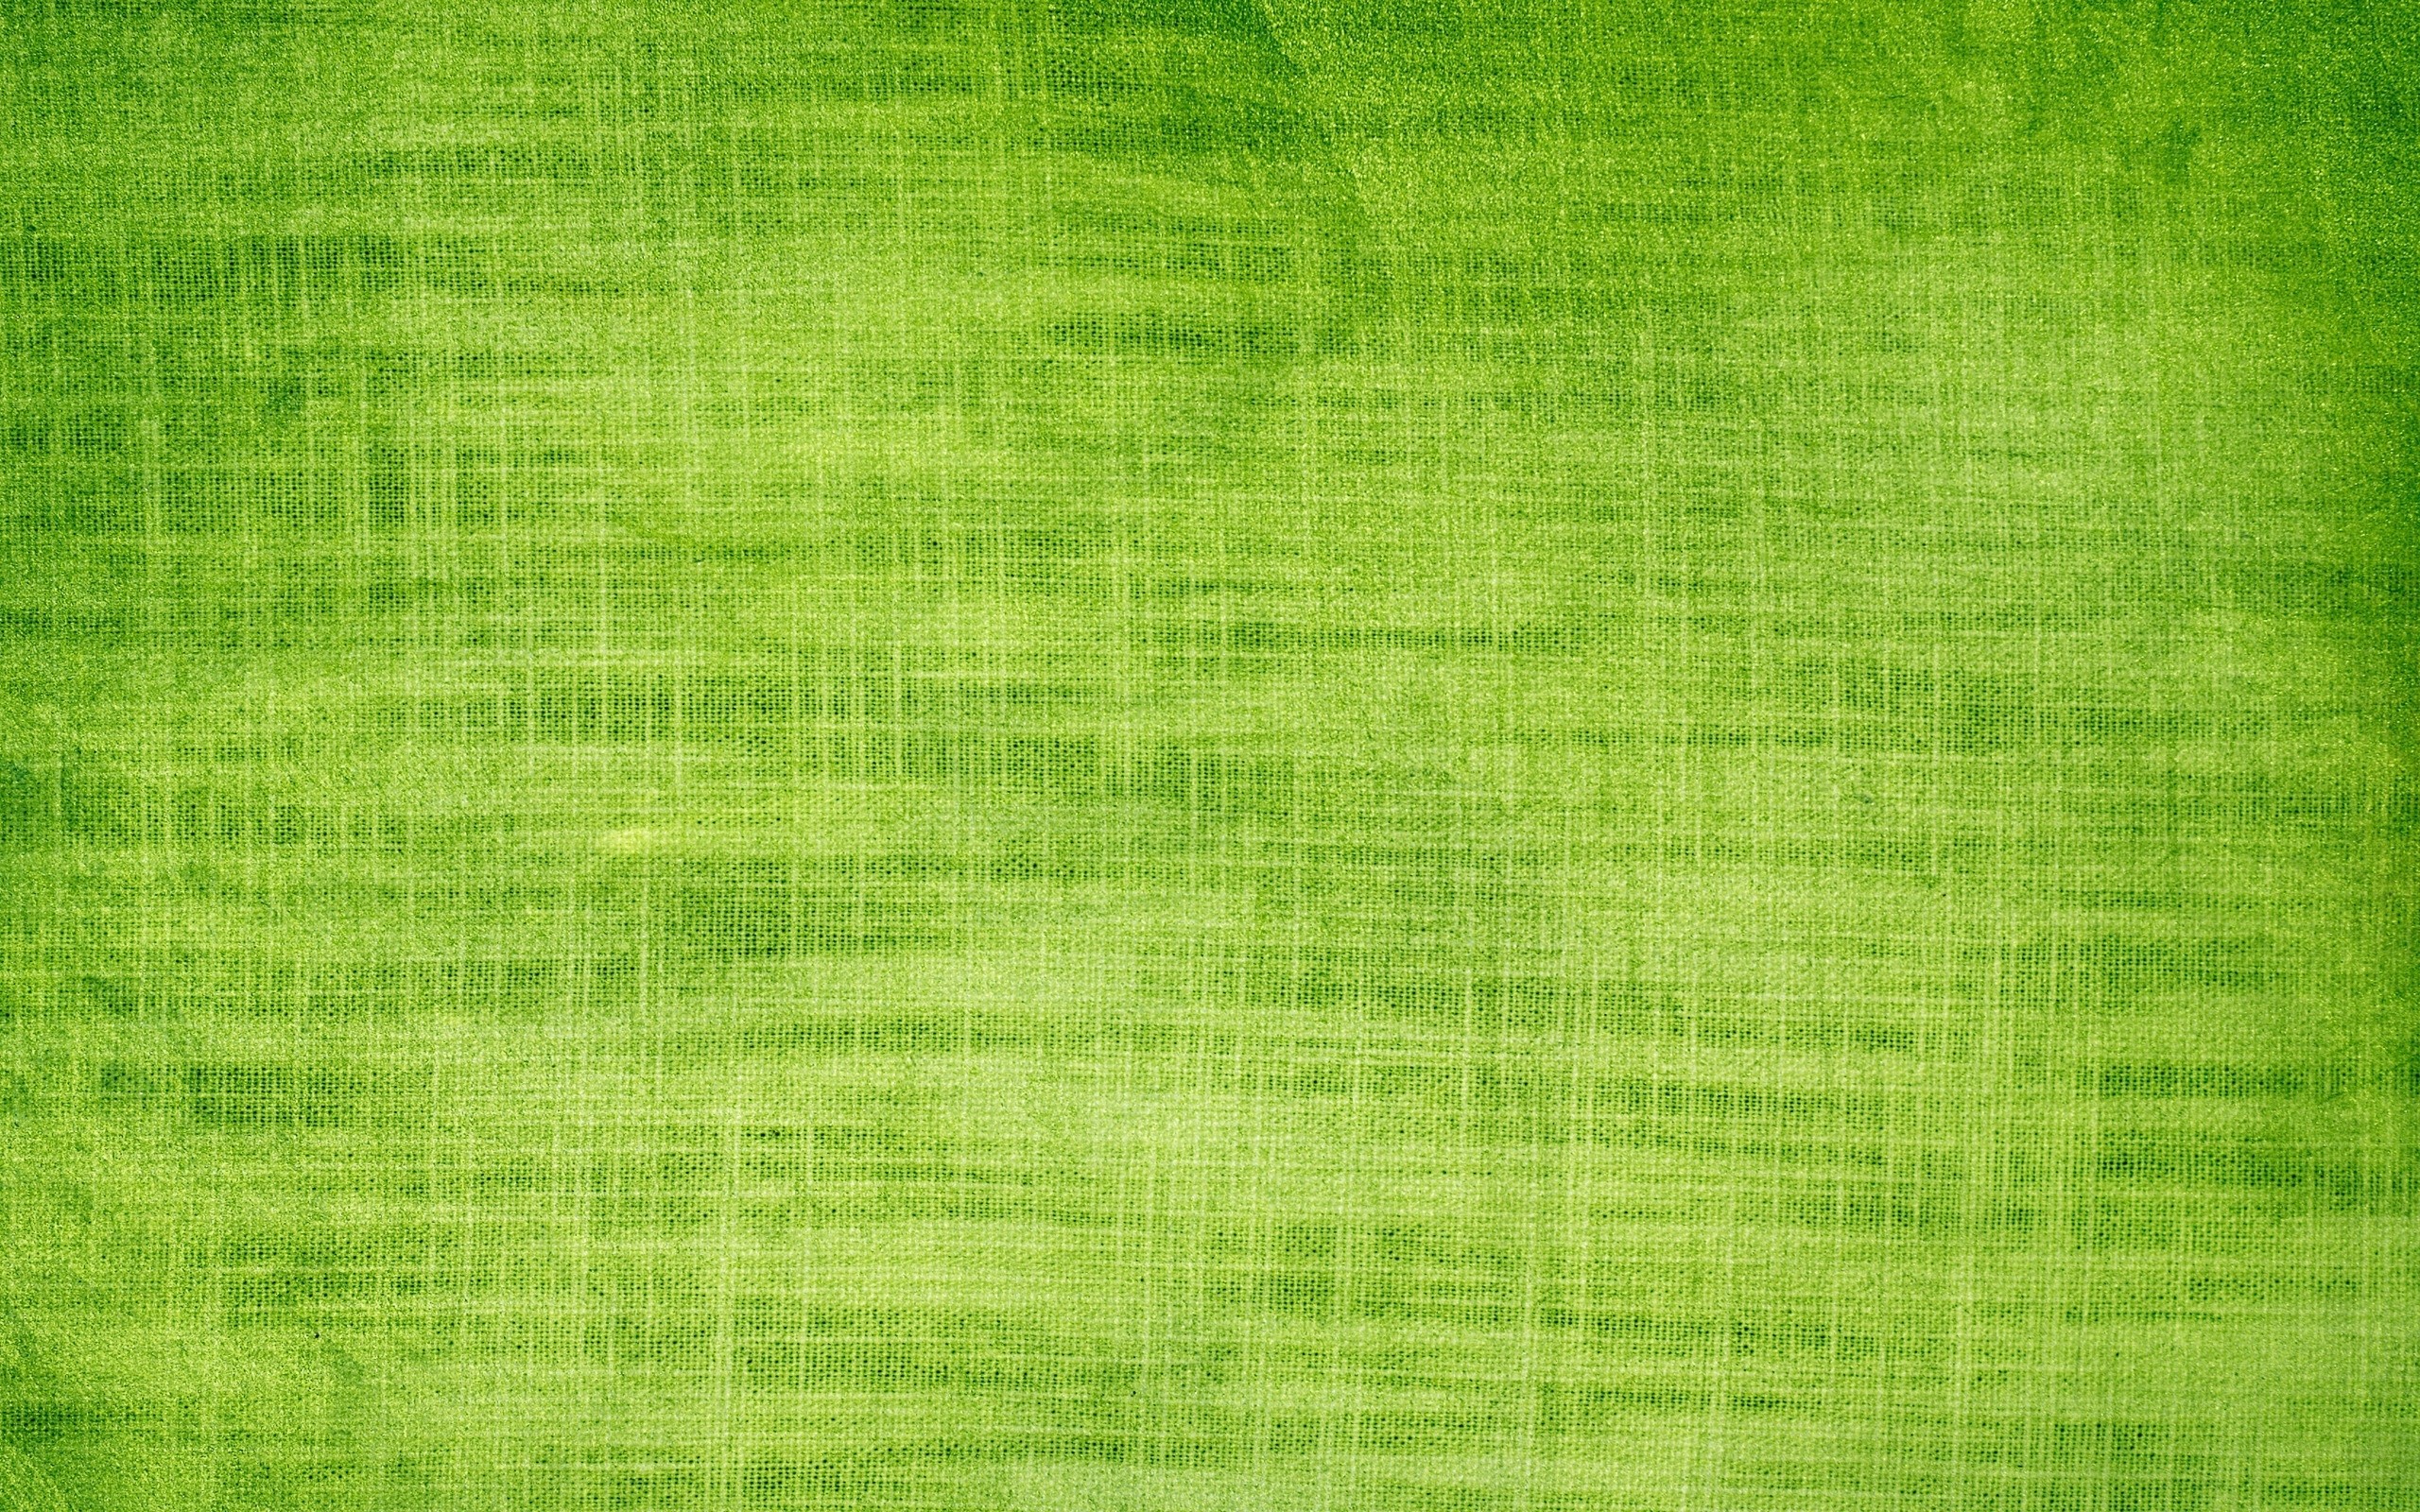 2560x1600 Green Bubbles. green background